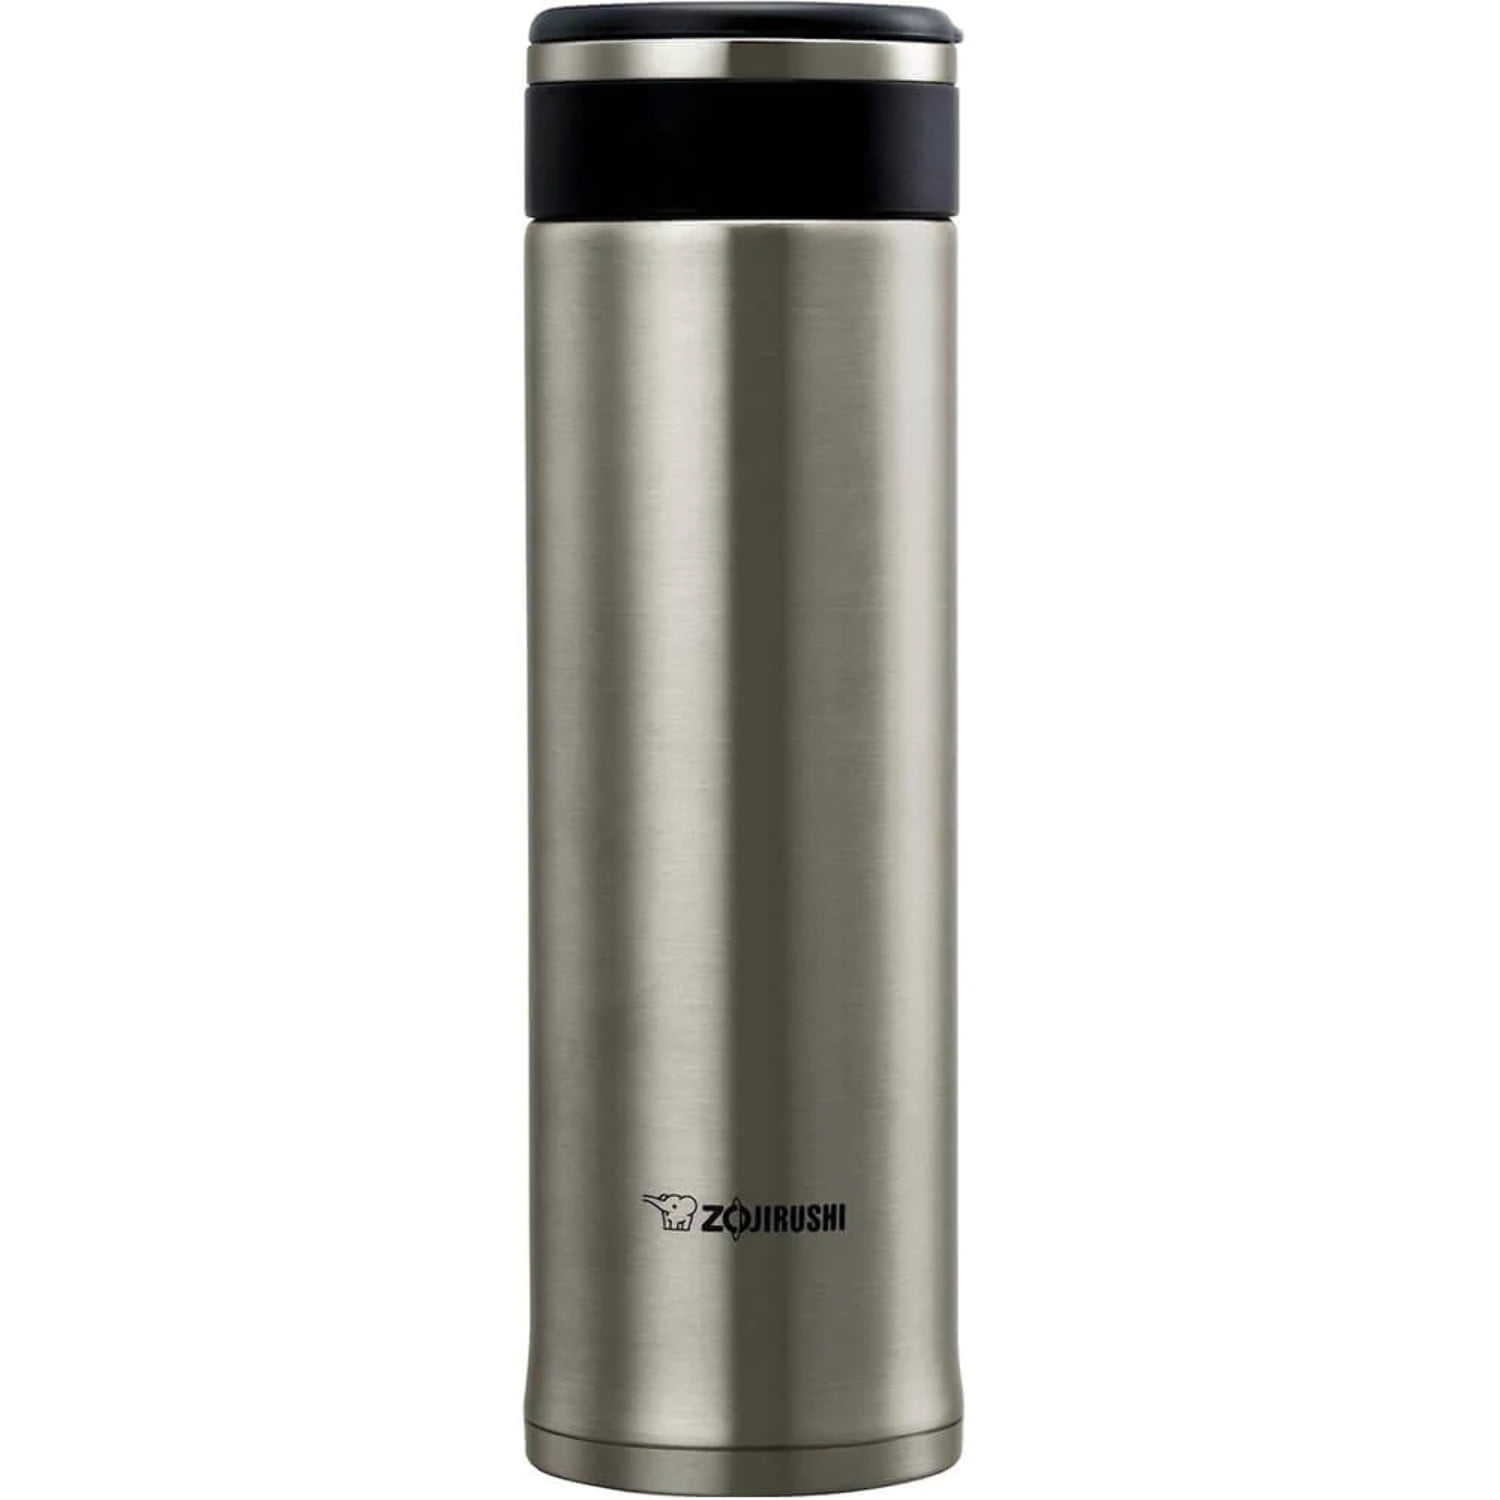 Zojirushi Travel Mug Review (Best of 2022) - Spartan Esquire